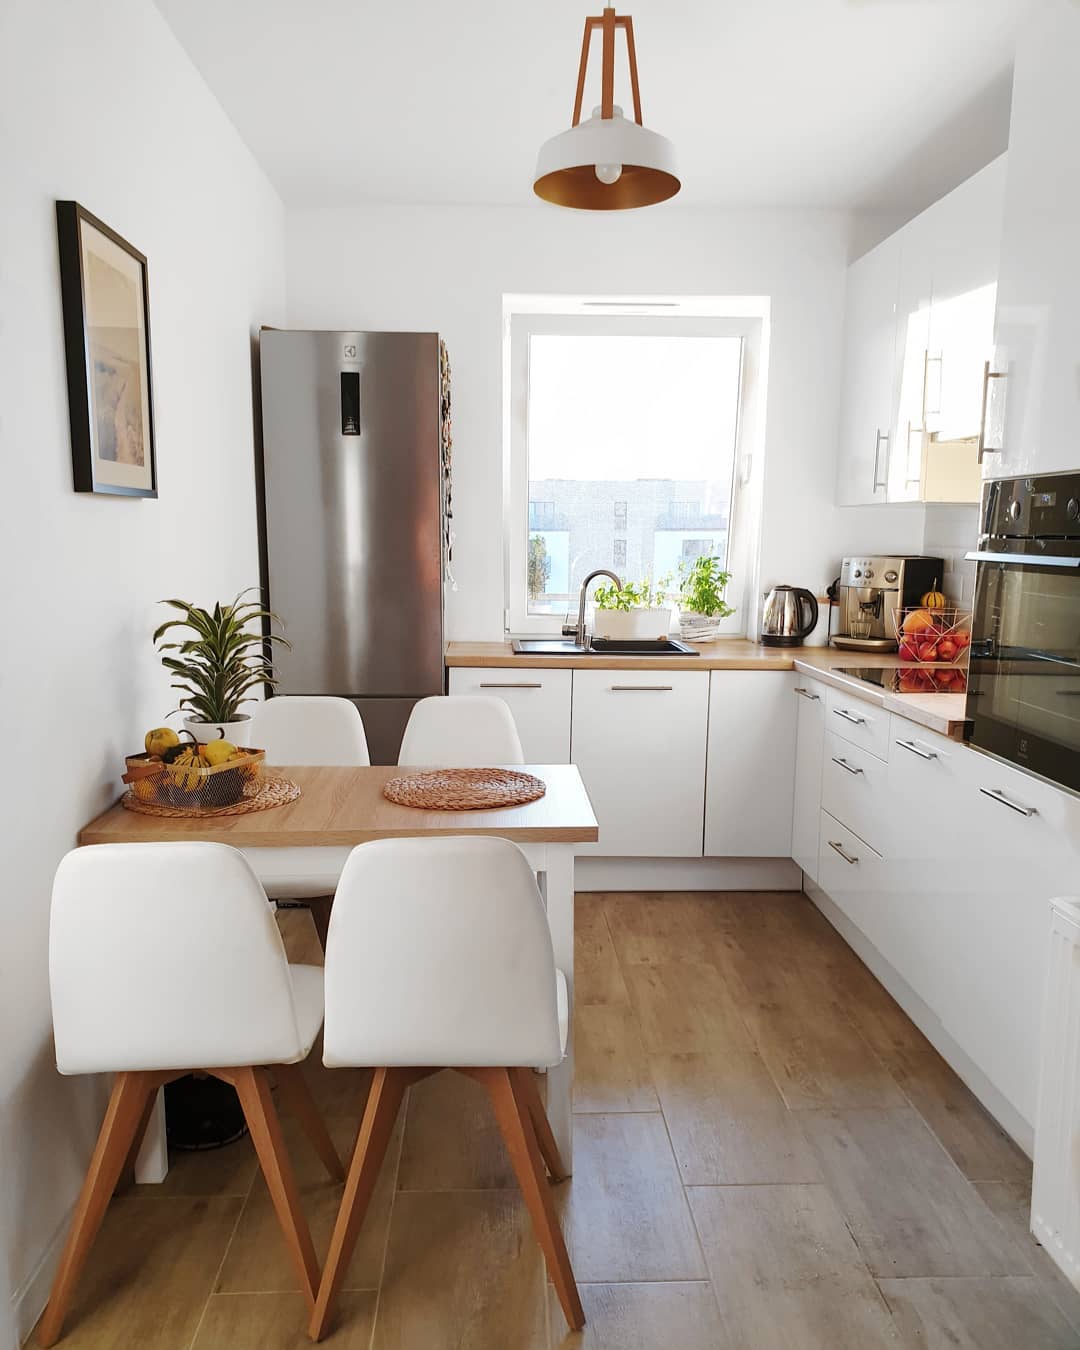 A simple guide: How to make the most of small spaces 